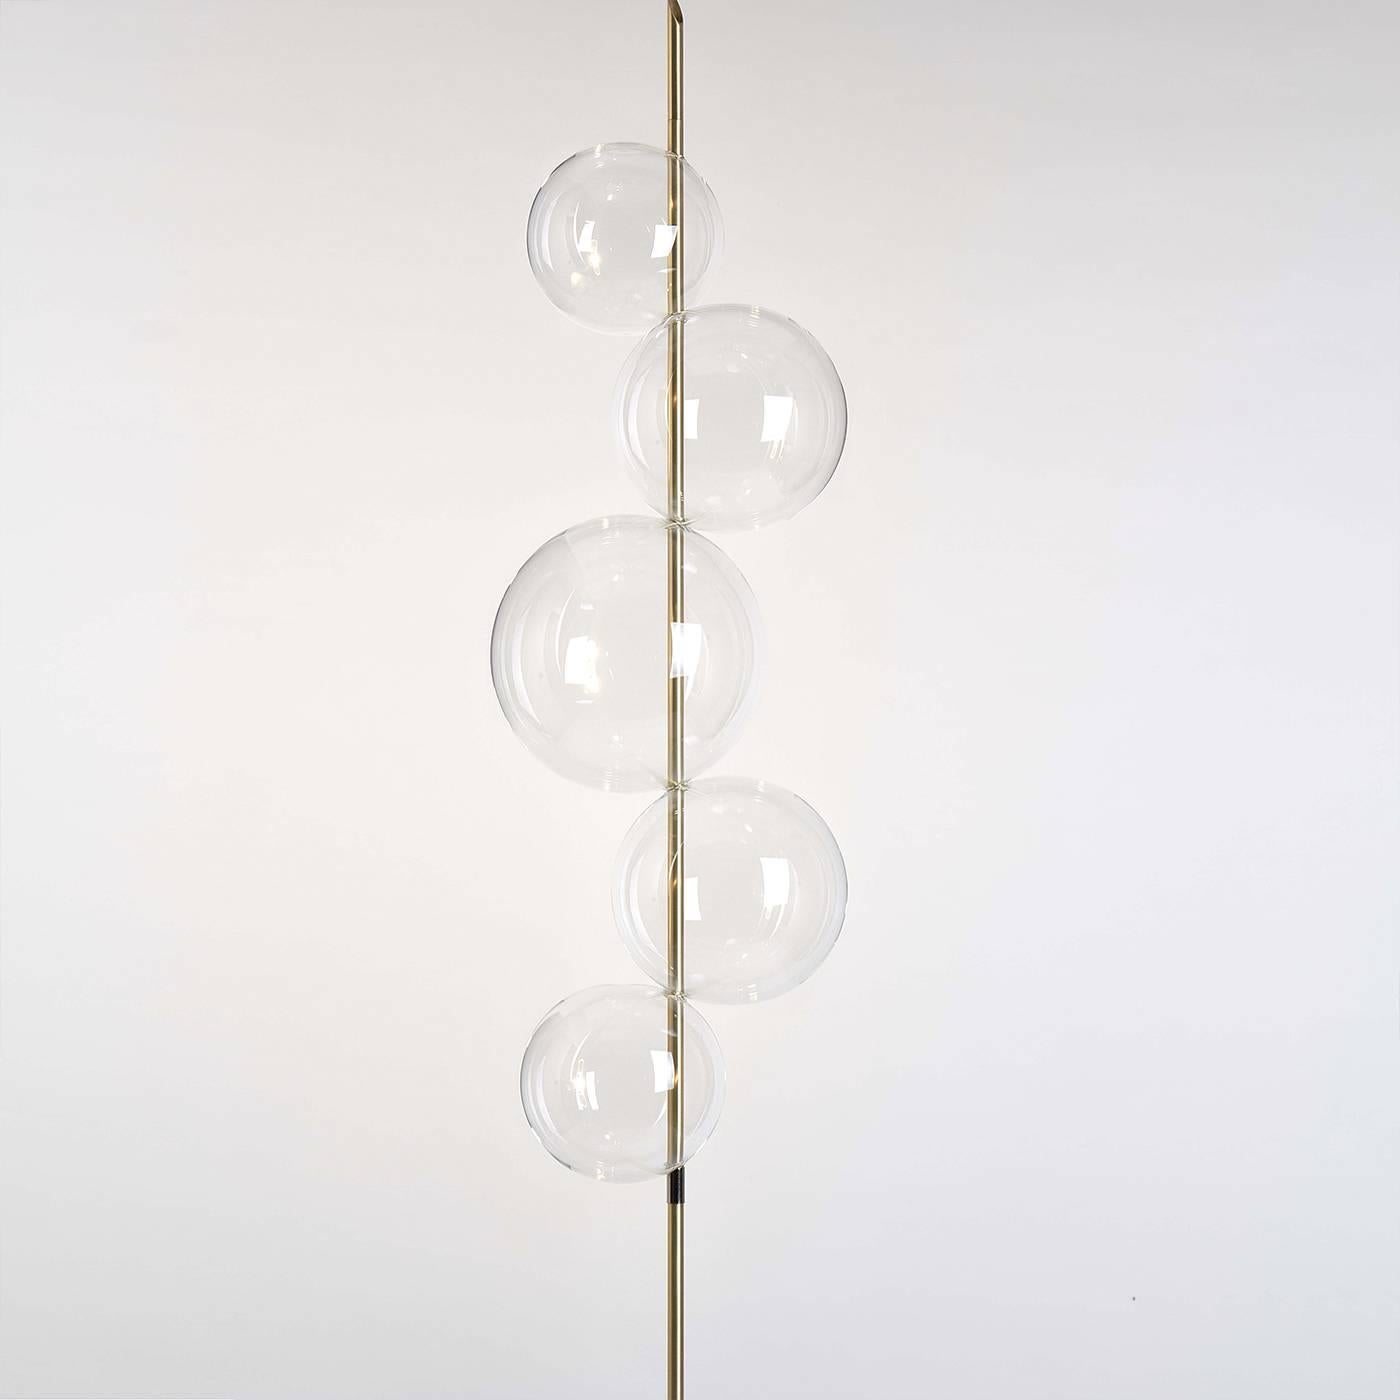 Part of the Grandine collection, this exquisite floor lamp is modern and sophisticated and will particularly complement a contemporary decor. Inspired by the shape and power of hail (